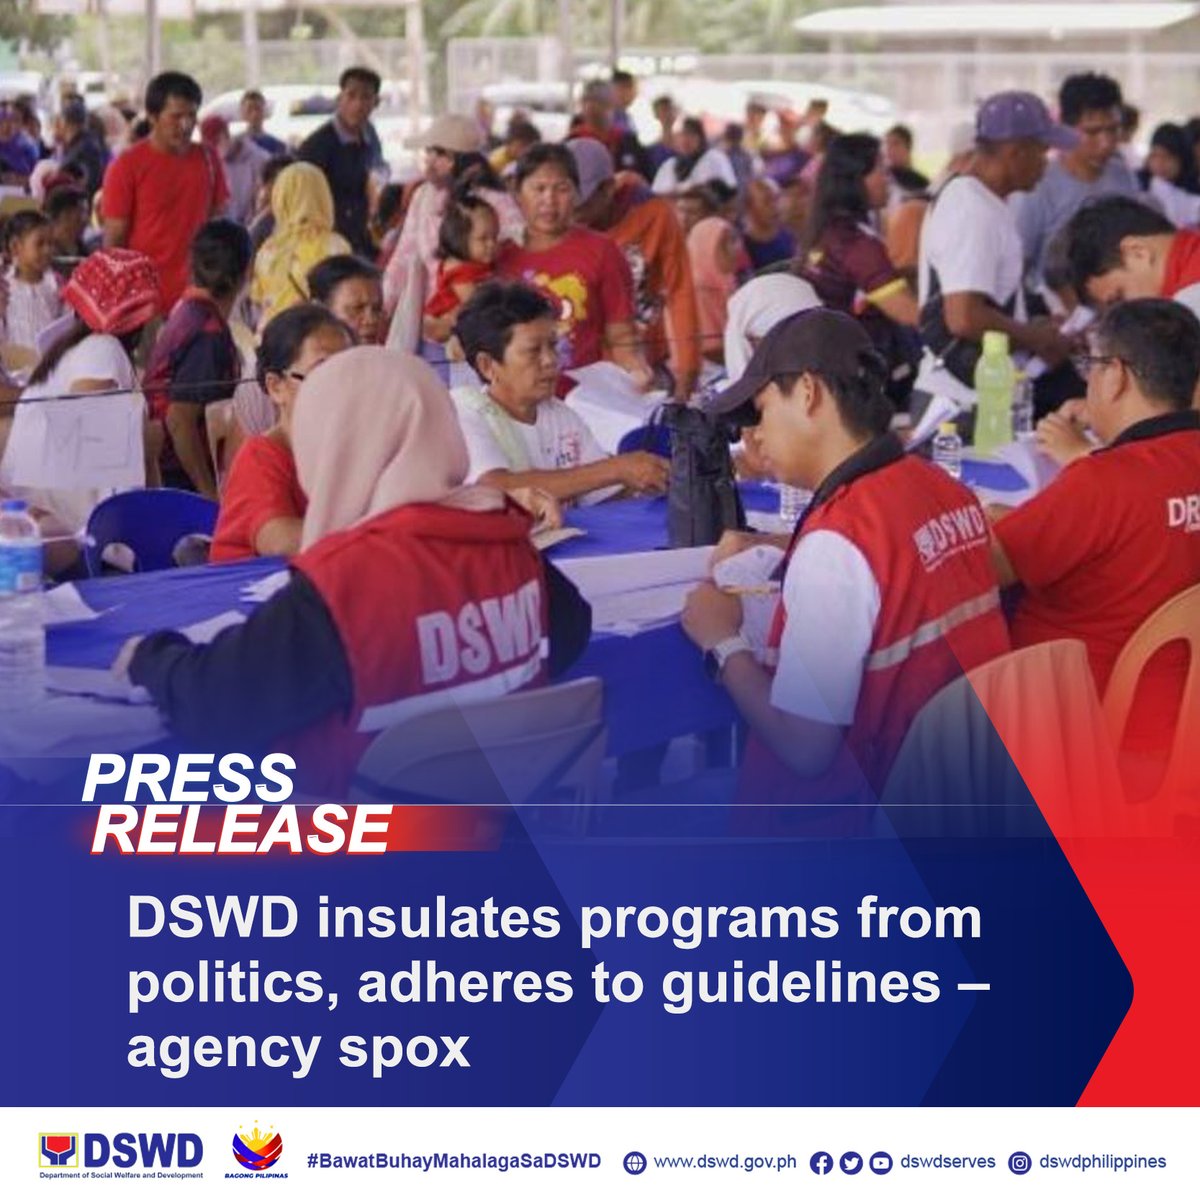 𝗗𝗦𝗪𝗗 𝗣𝗥𝗘𝗦𝗦 𝗥𝗘𝗟𝗘𝗔𝗦𝗘: DSWD insulates programs from politics, adheres to guidelines – agency spox The Department of Social Welfare and Development (DSWD) ensures that its programs and services are insulated from politics and maintains the highest level of